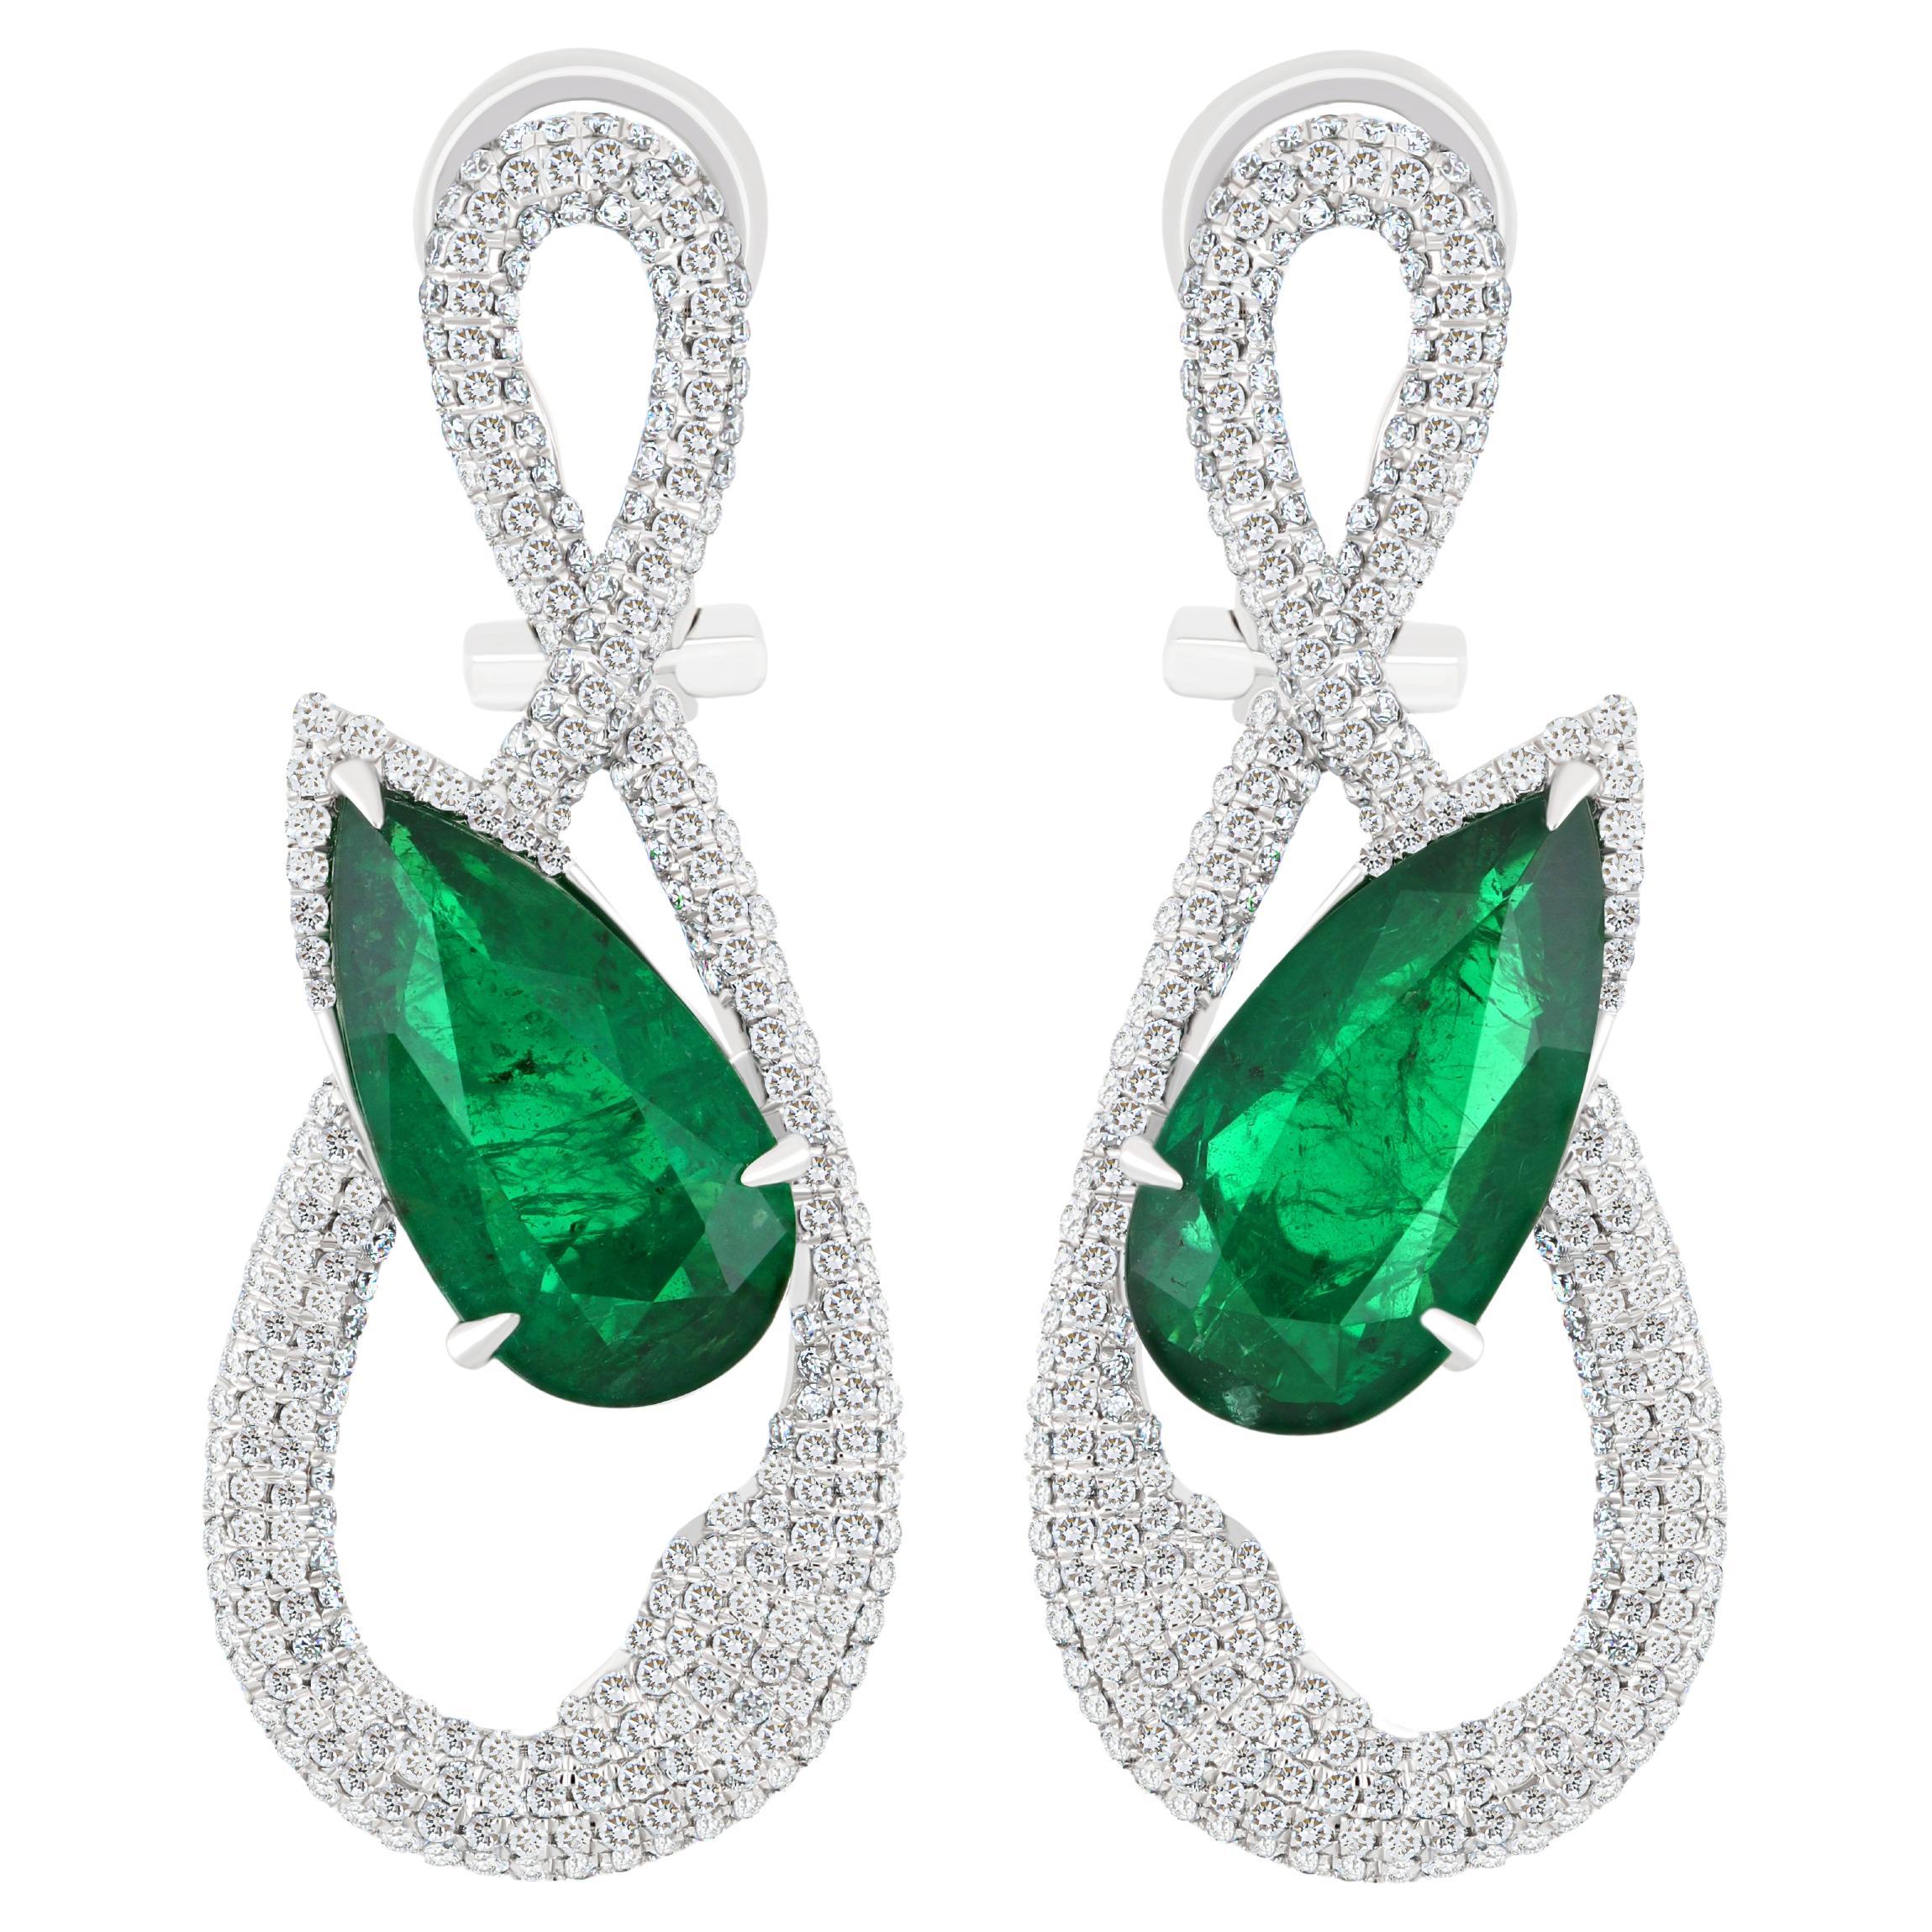  7.56Cts Emerald & Diamond Earring in 18k White Gold for Charismas Gift Earring  For Sale